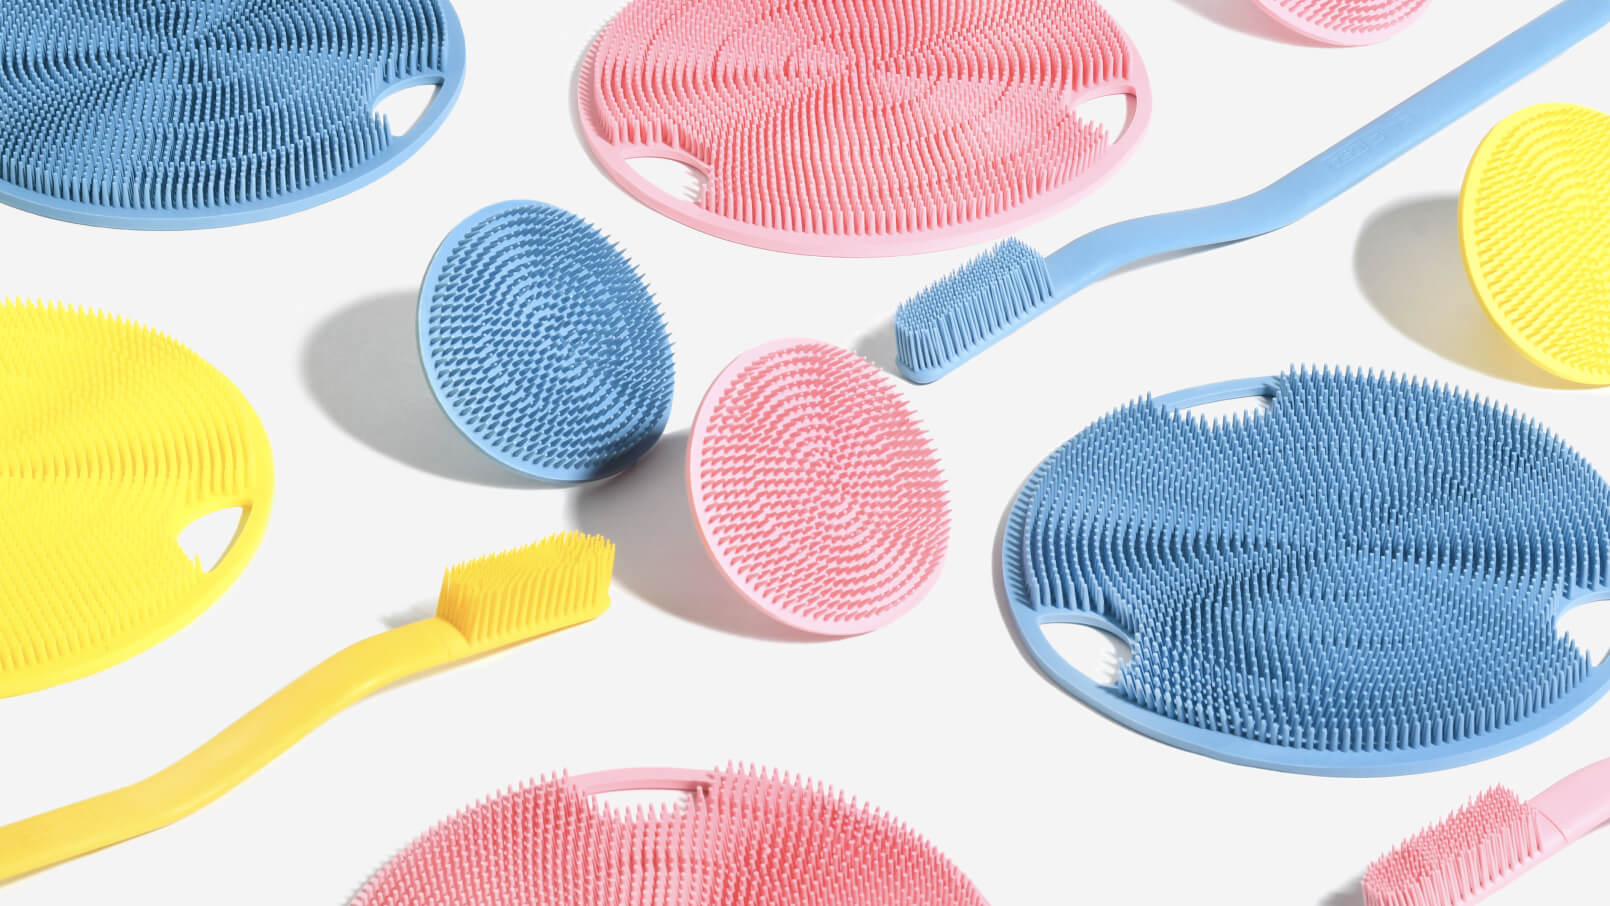 A colorful array of Boie toothbrushes, face scrubbers, and body scrubbers.